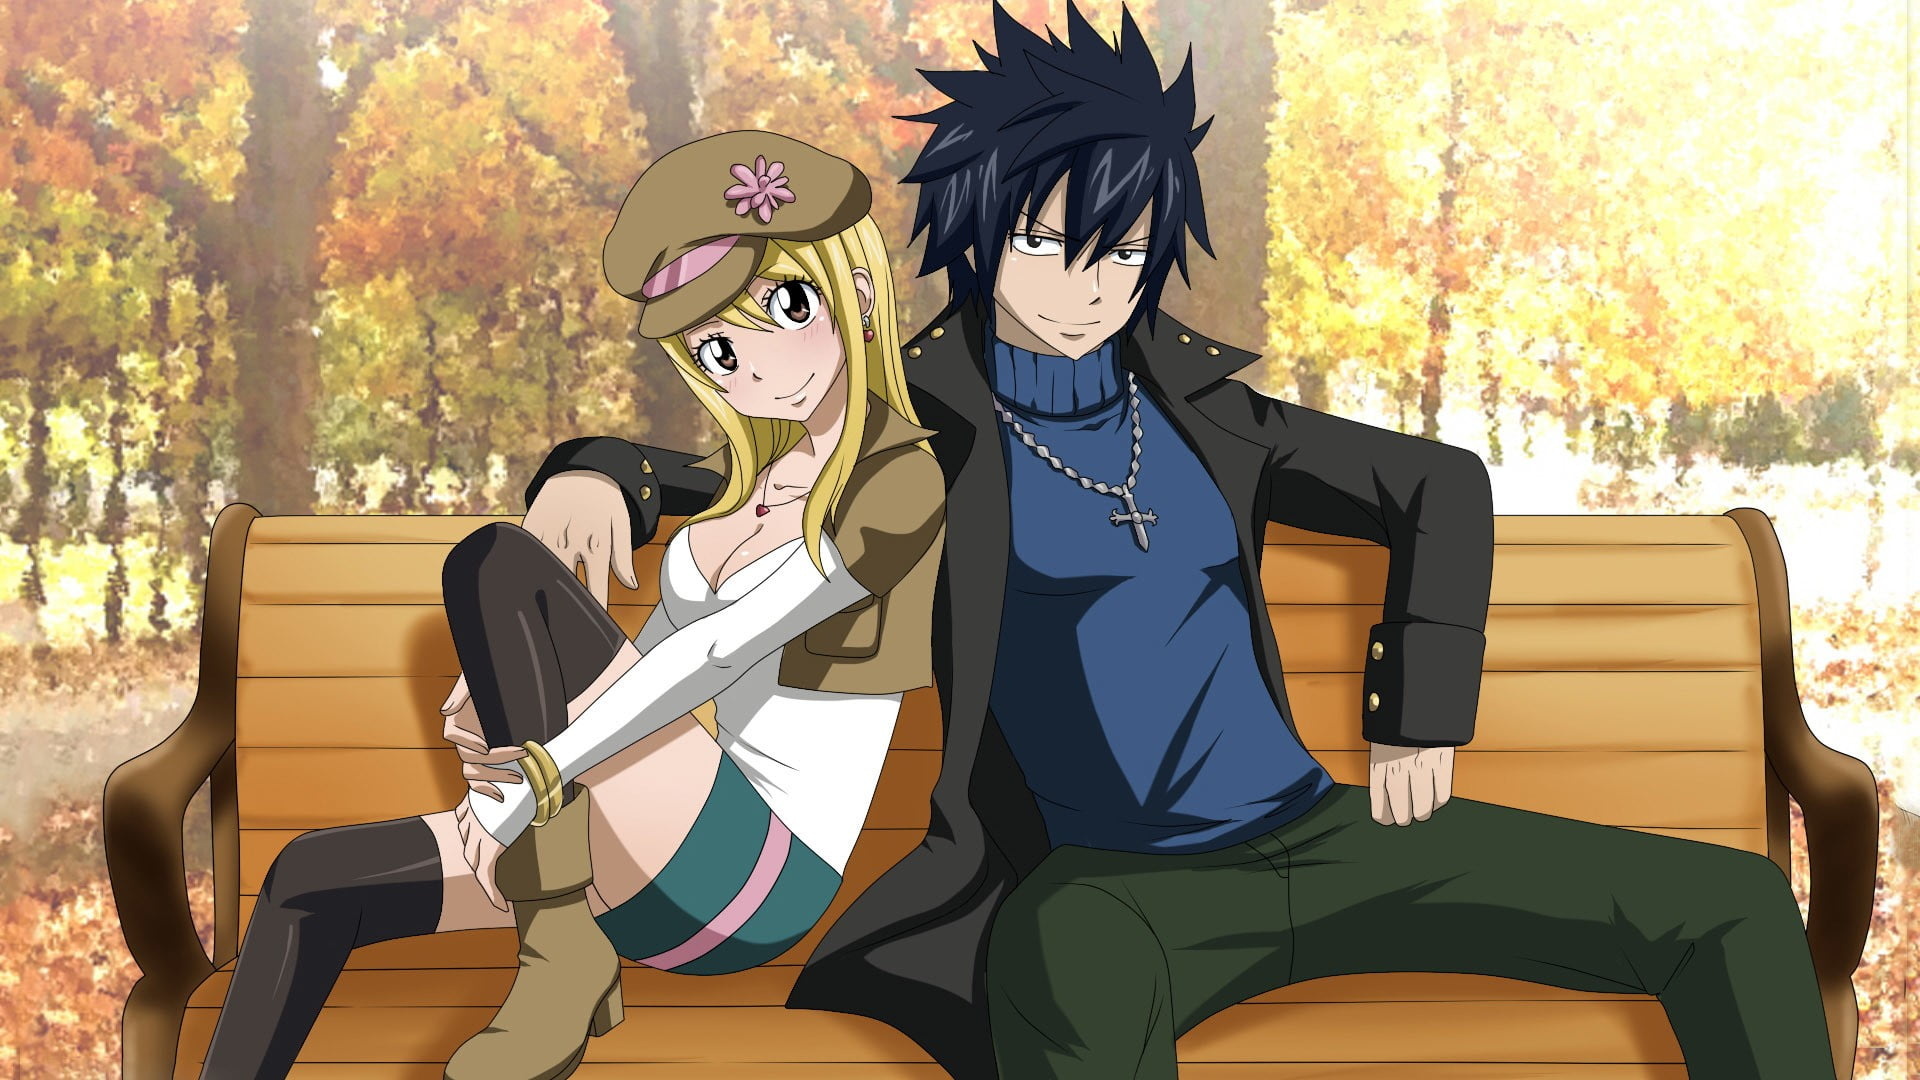 Gray Fullbuster: GrayLu, Lucy Heartfilia, The series' main female protagonist, The wealthy Heartfilia family. 1920x1080 Full HD Wallpaper.